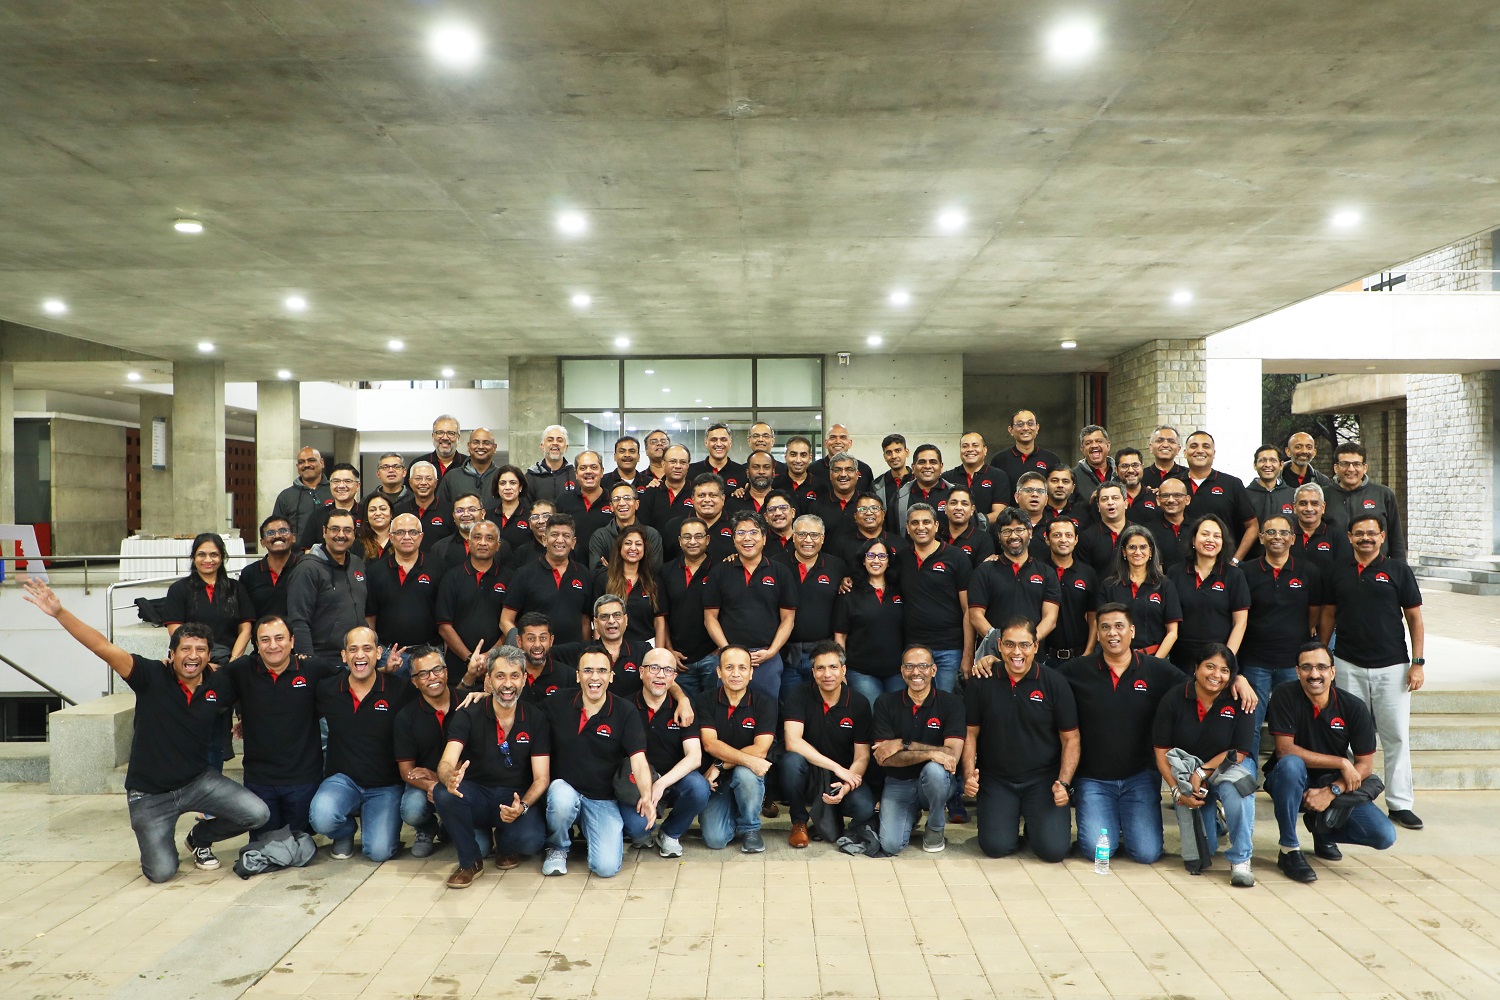 The PGP 1997 batch celebrated its 25th-year reunion at the IIMB Campus on 10 and 11 December 2022.